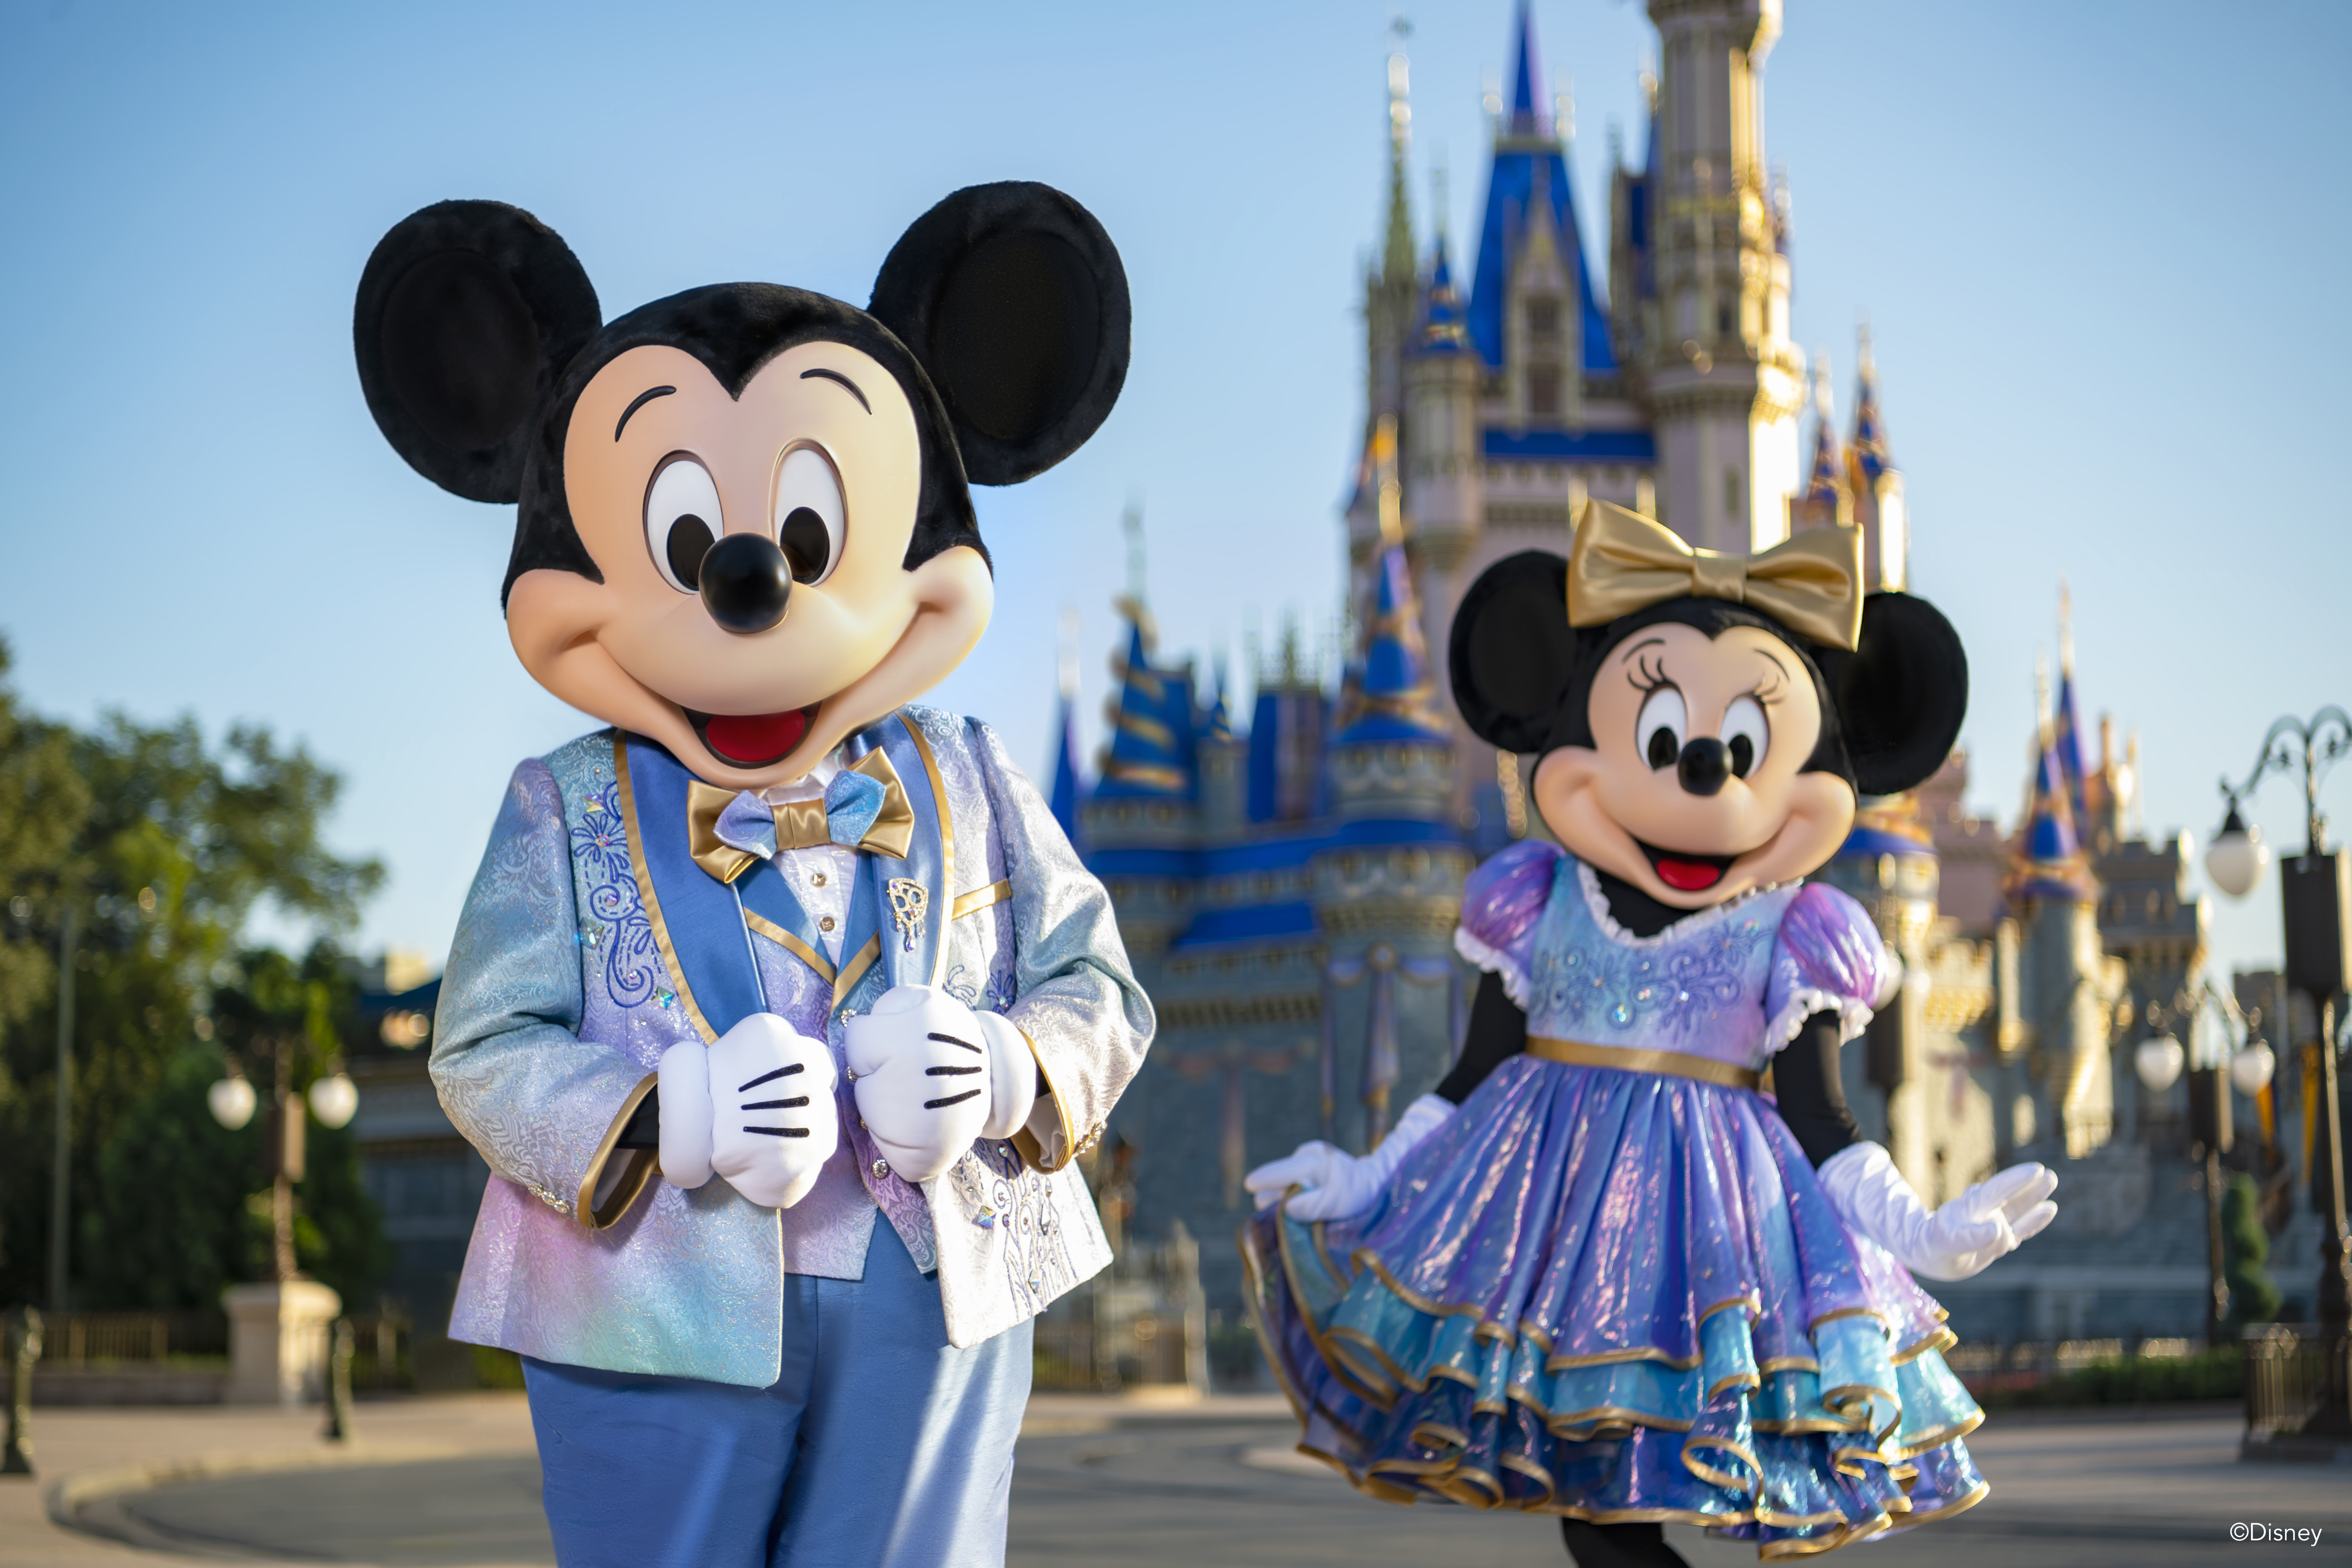 Disney vacation package